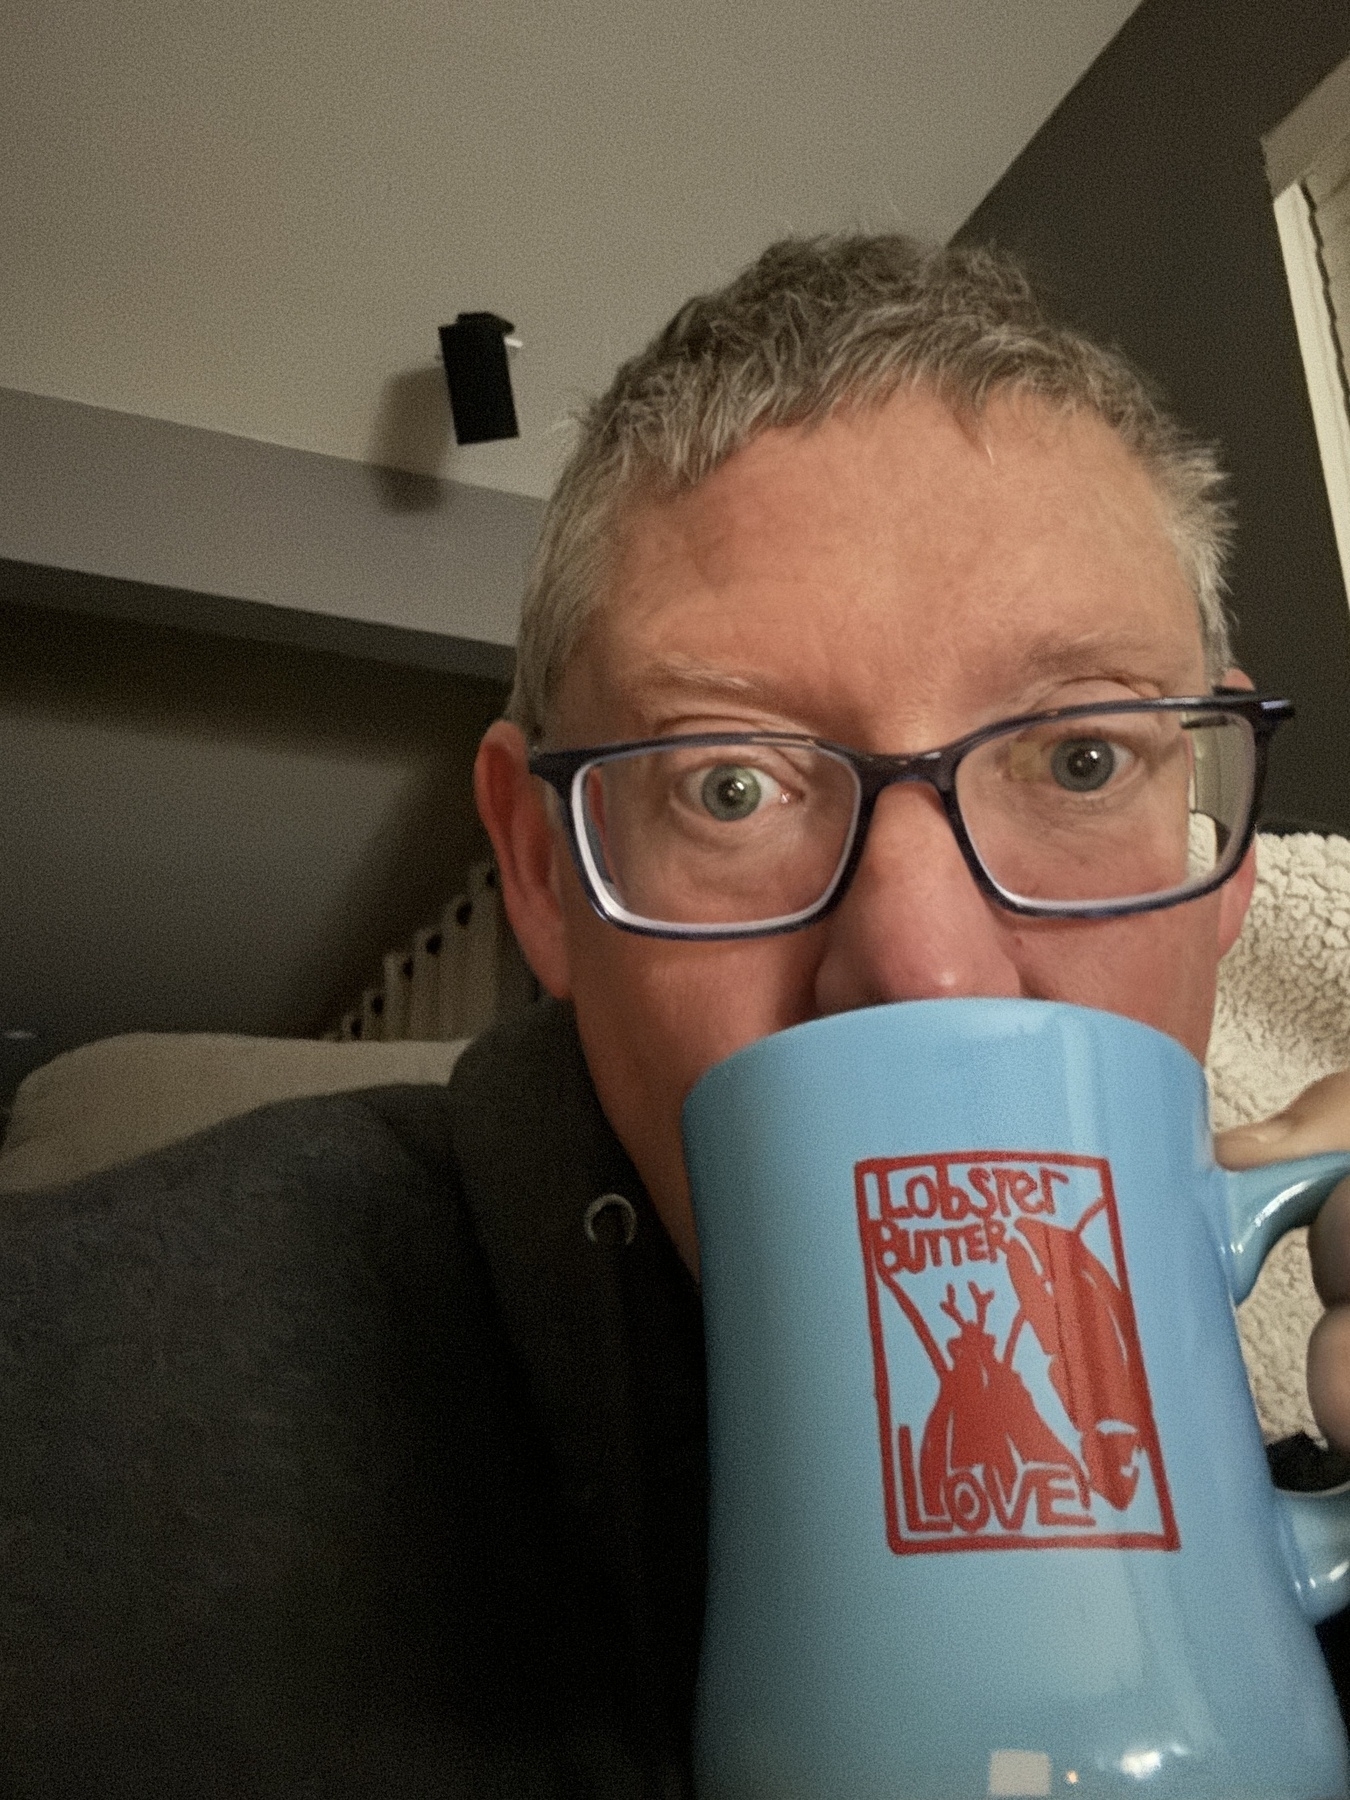 A middle aged fella sipping from a coffee mug 